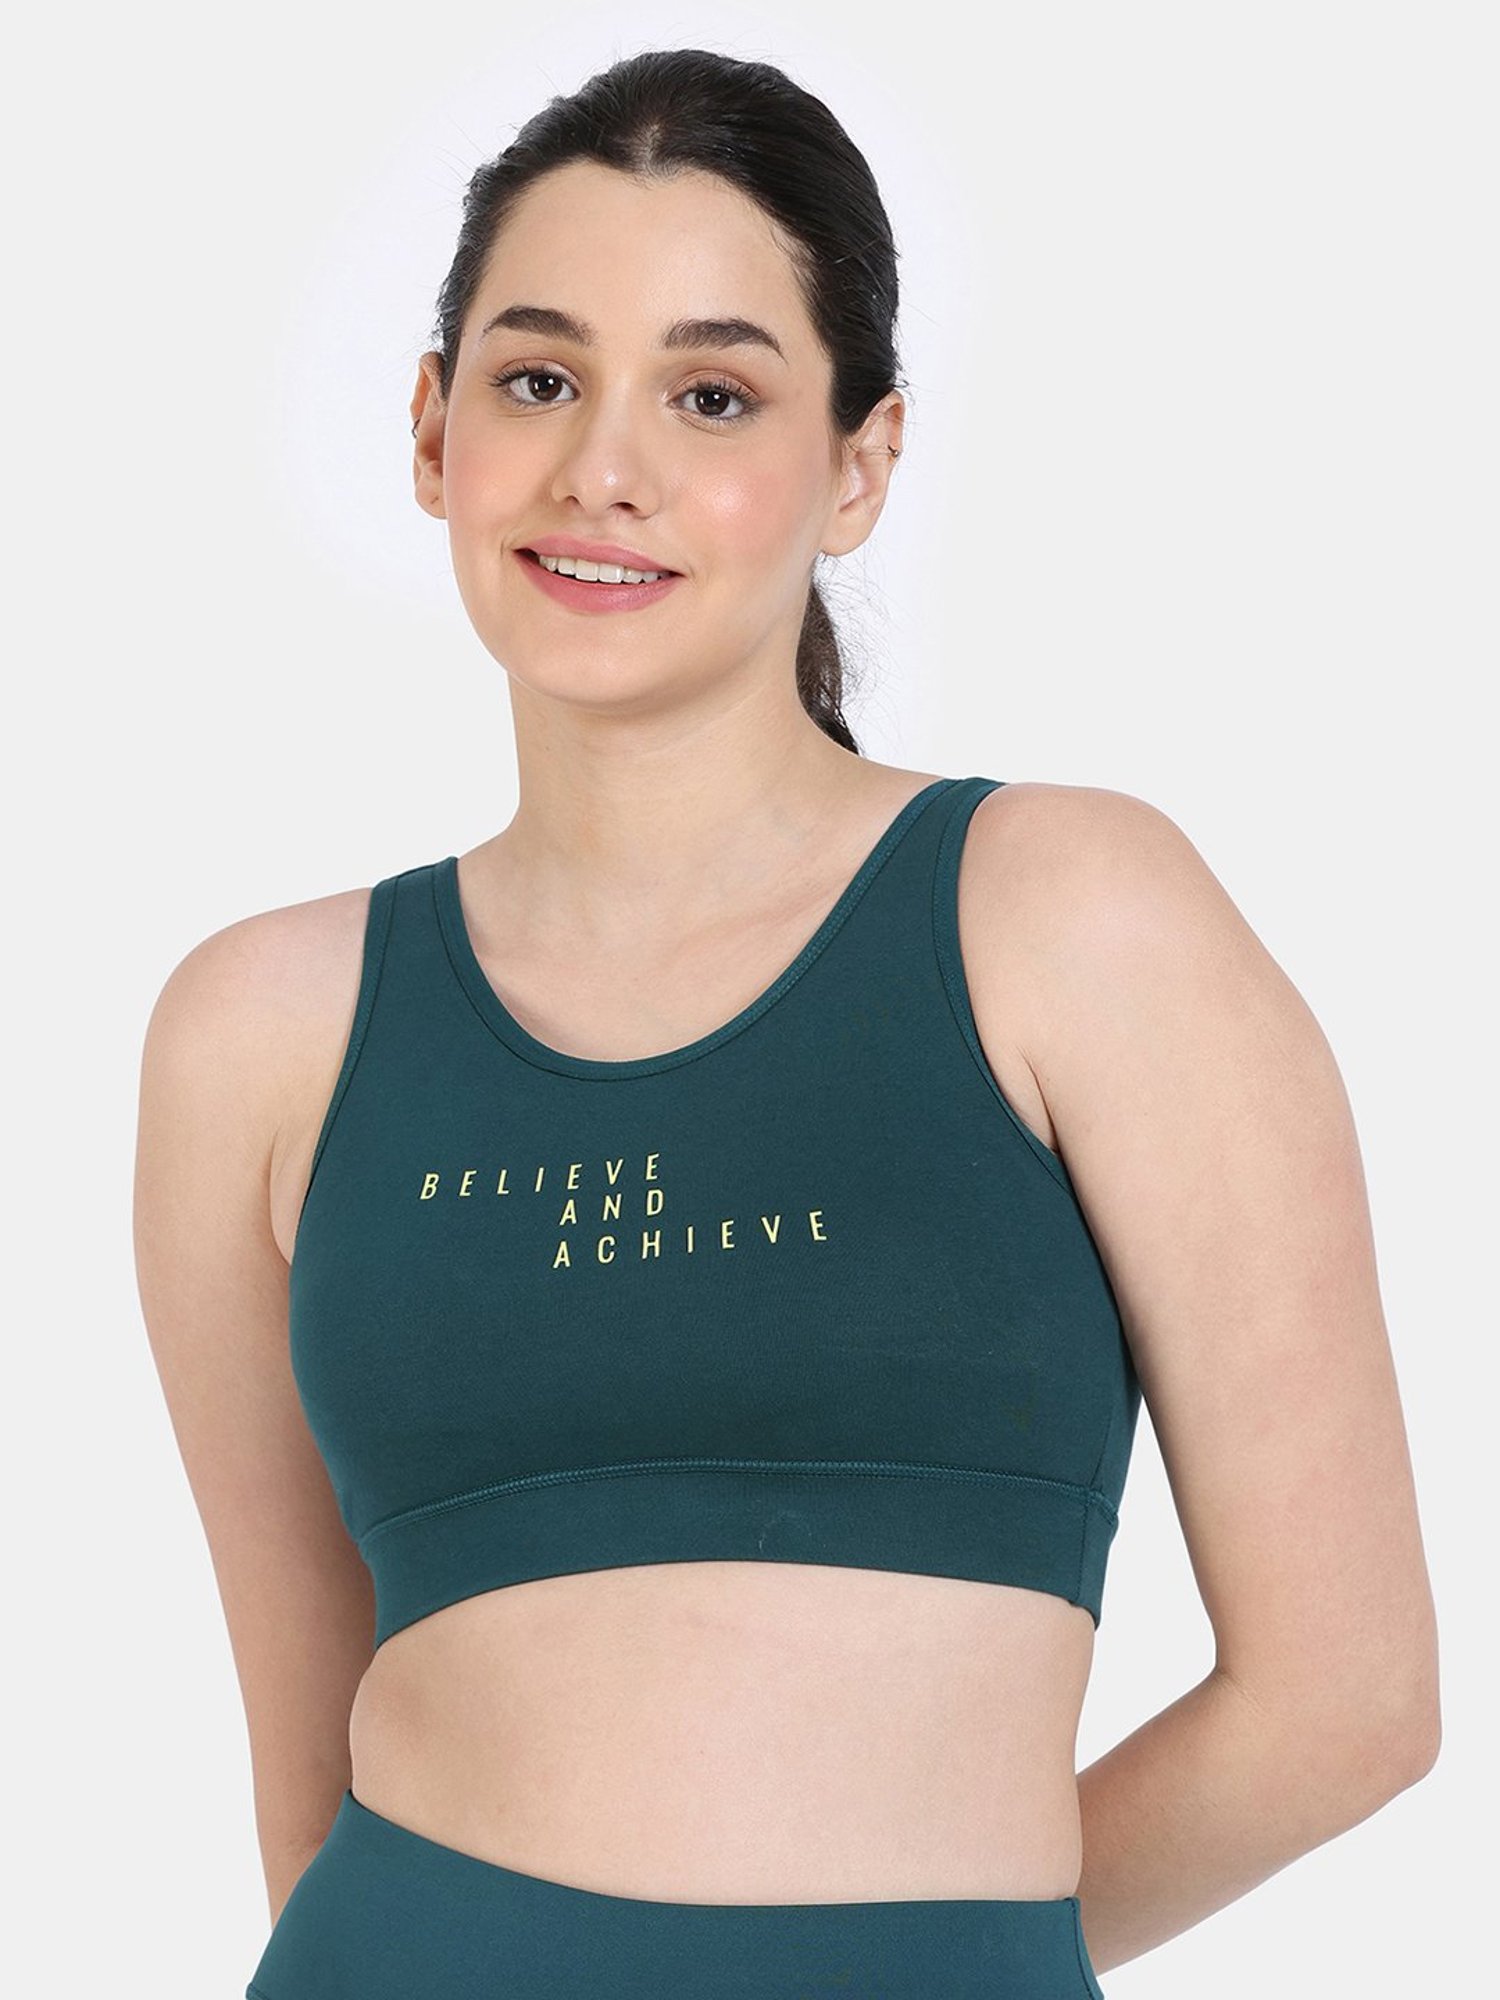 Buy Zivame Zelocity Quick Dry Sports Bra With Removable Padding